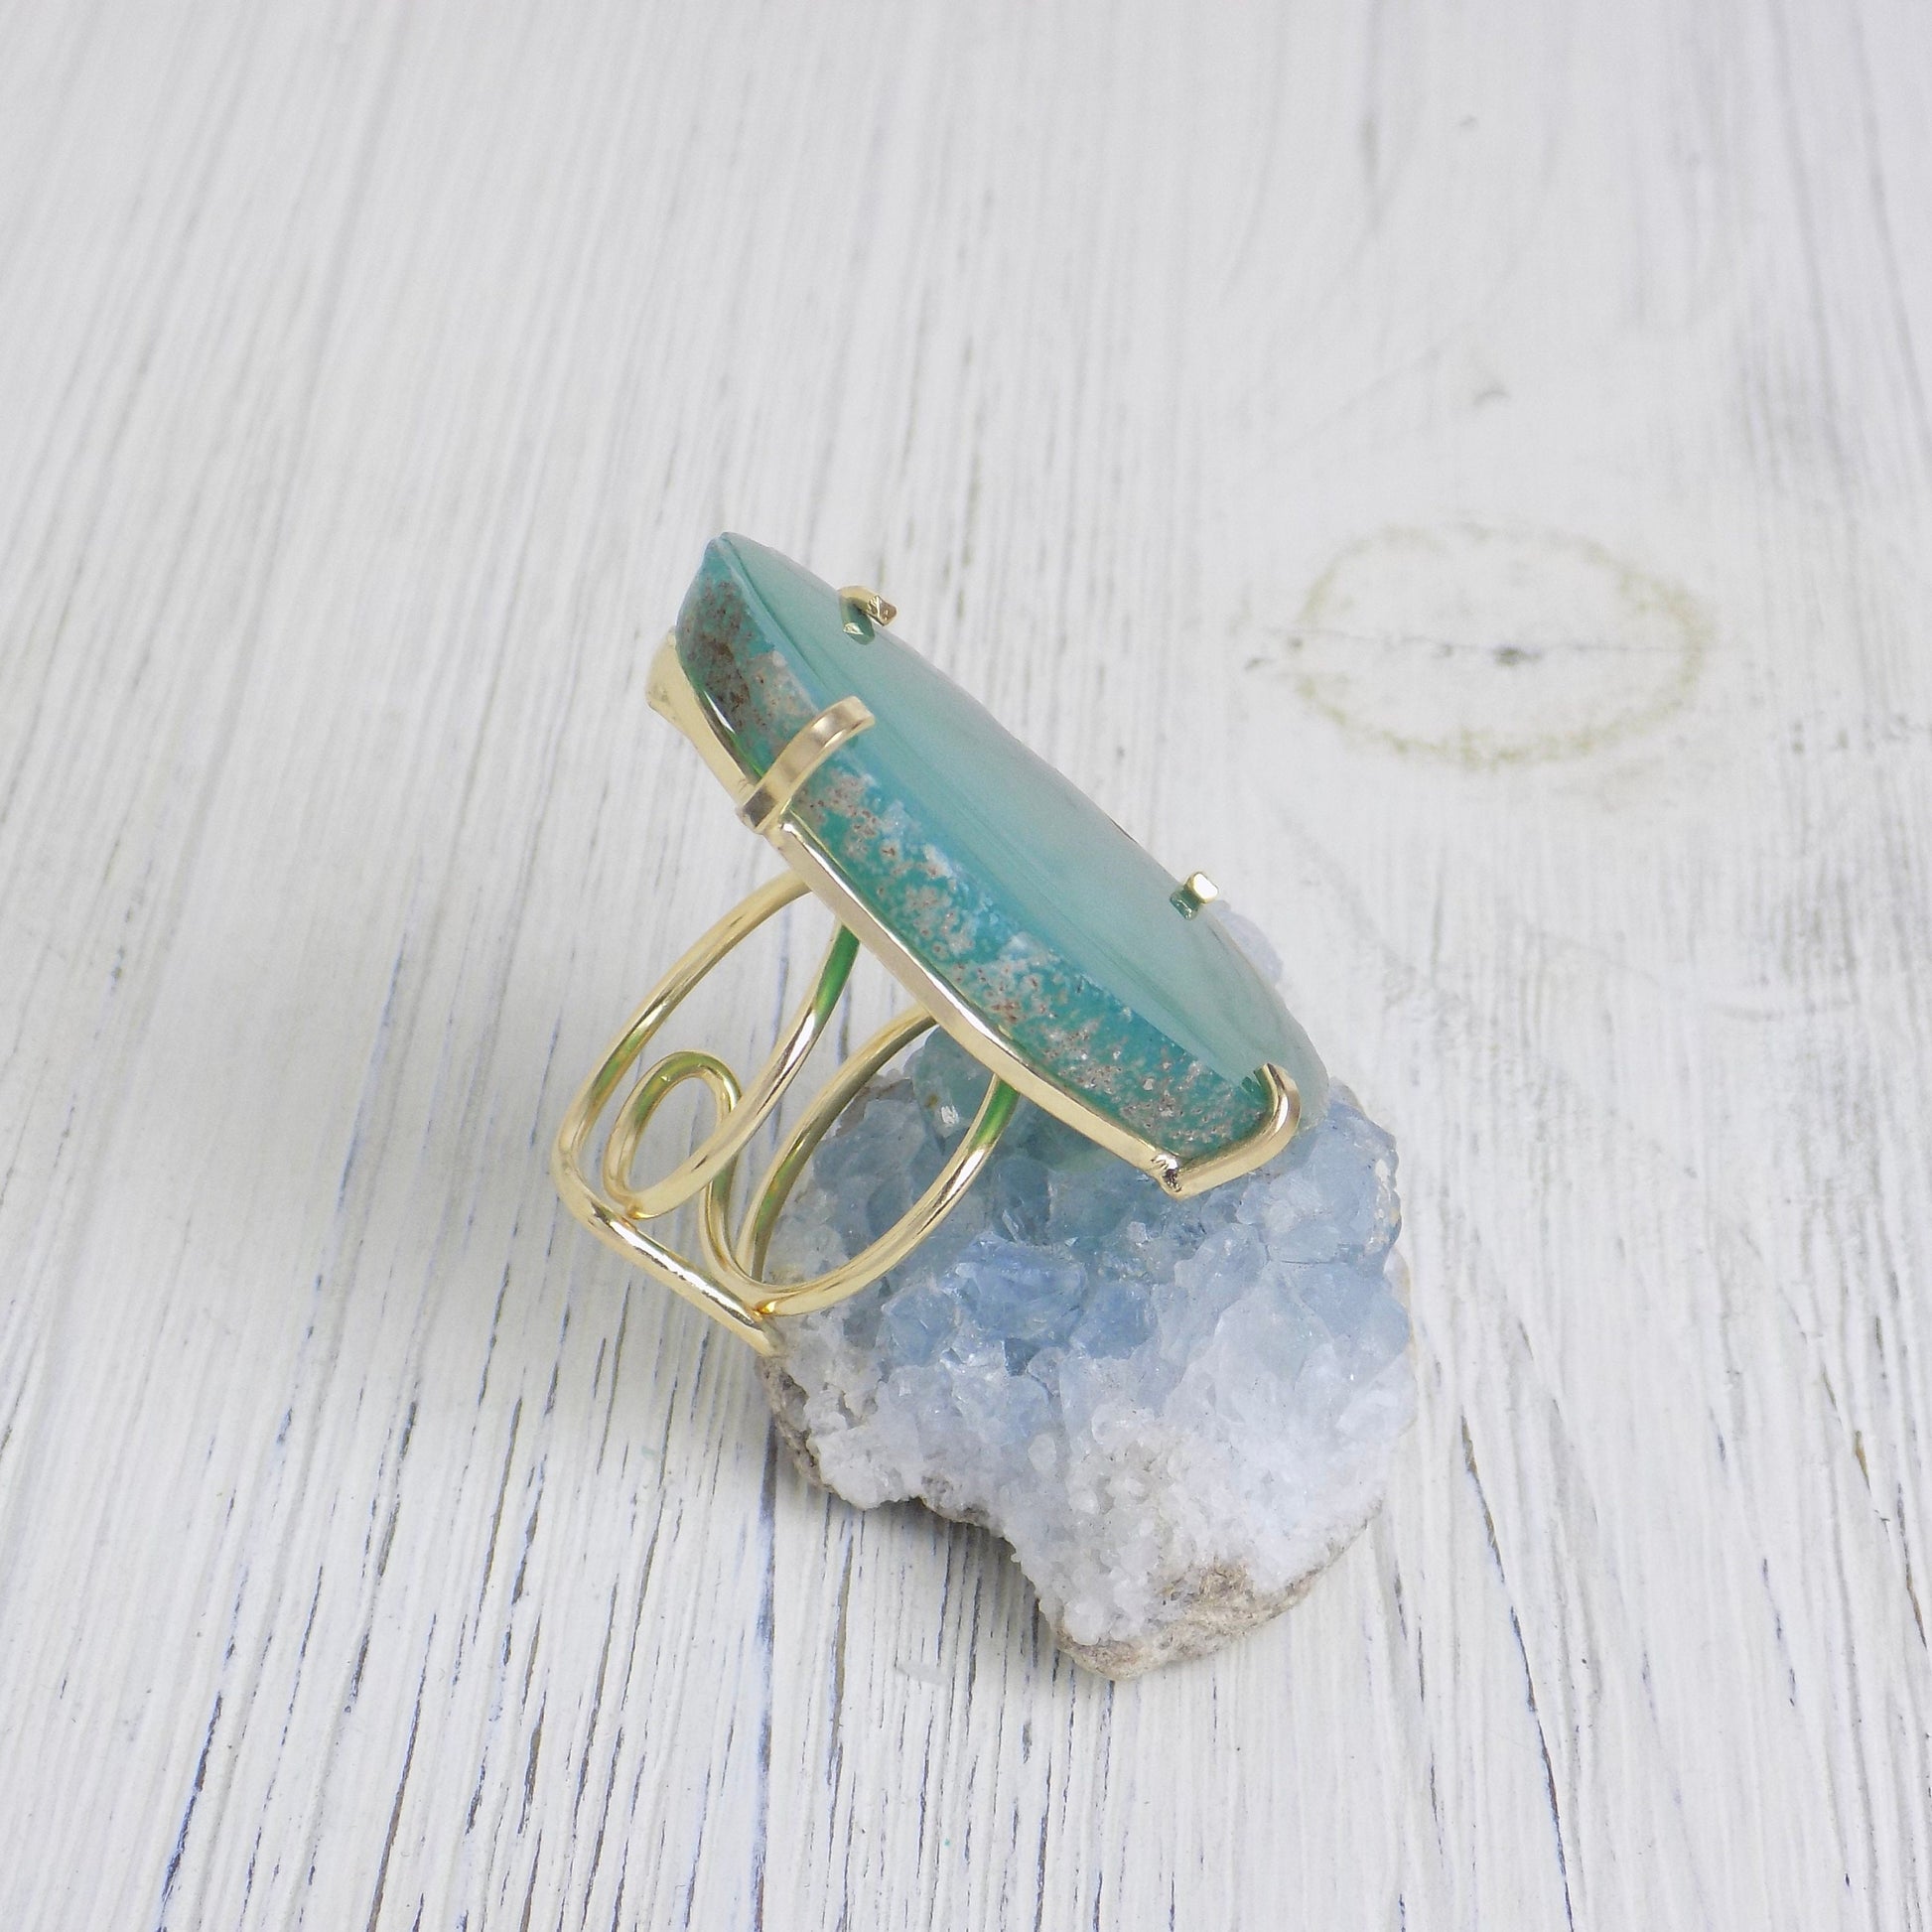 Emerald Green Large Agate Slice Gemstone Ring, Boho Statement Raw Crystal Ring Adjustable Gold Dipped, G13-391